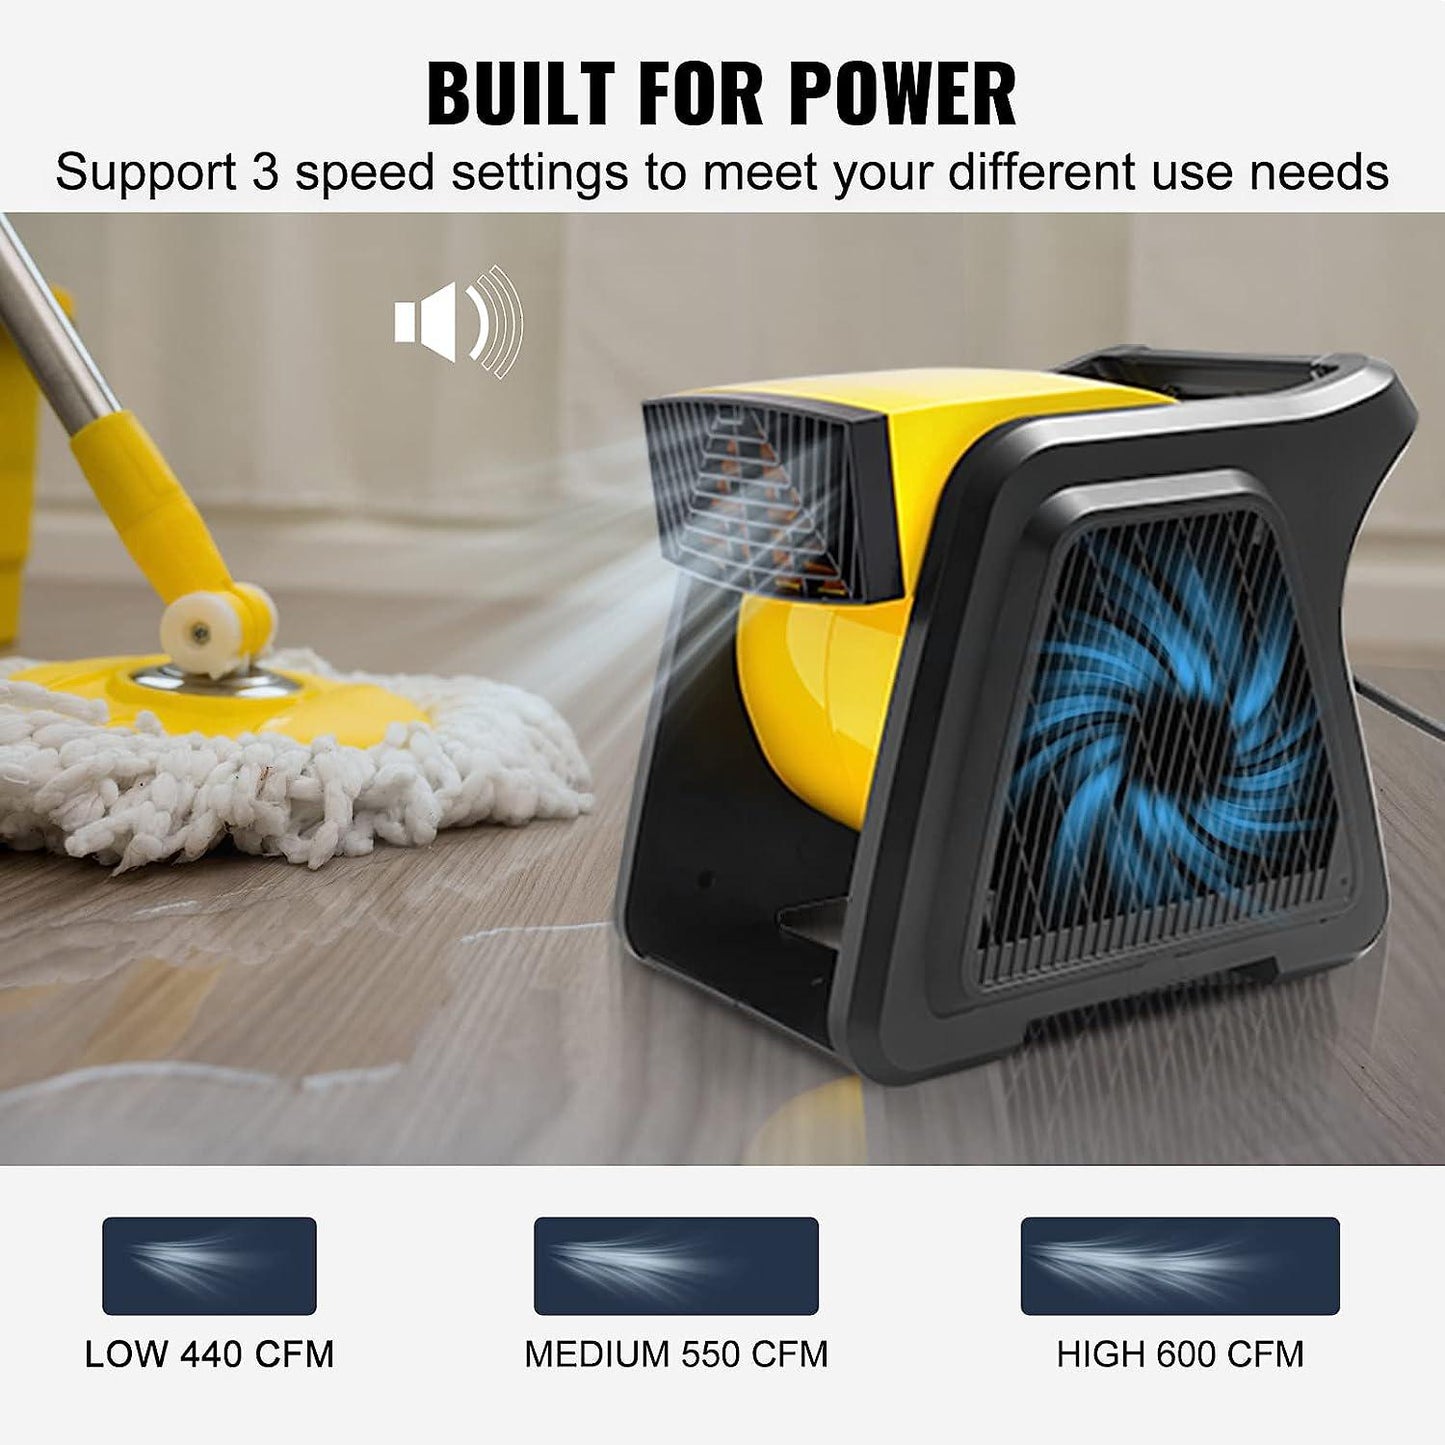 Pivoting Utility Fan, 600 CFM High Velocity Floor Blower for Drying, Cooling, Ventilating, Exhausting, 300° Blowing Angle Air Mover, Portable Carpet Dryer Fan